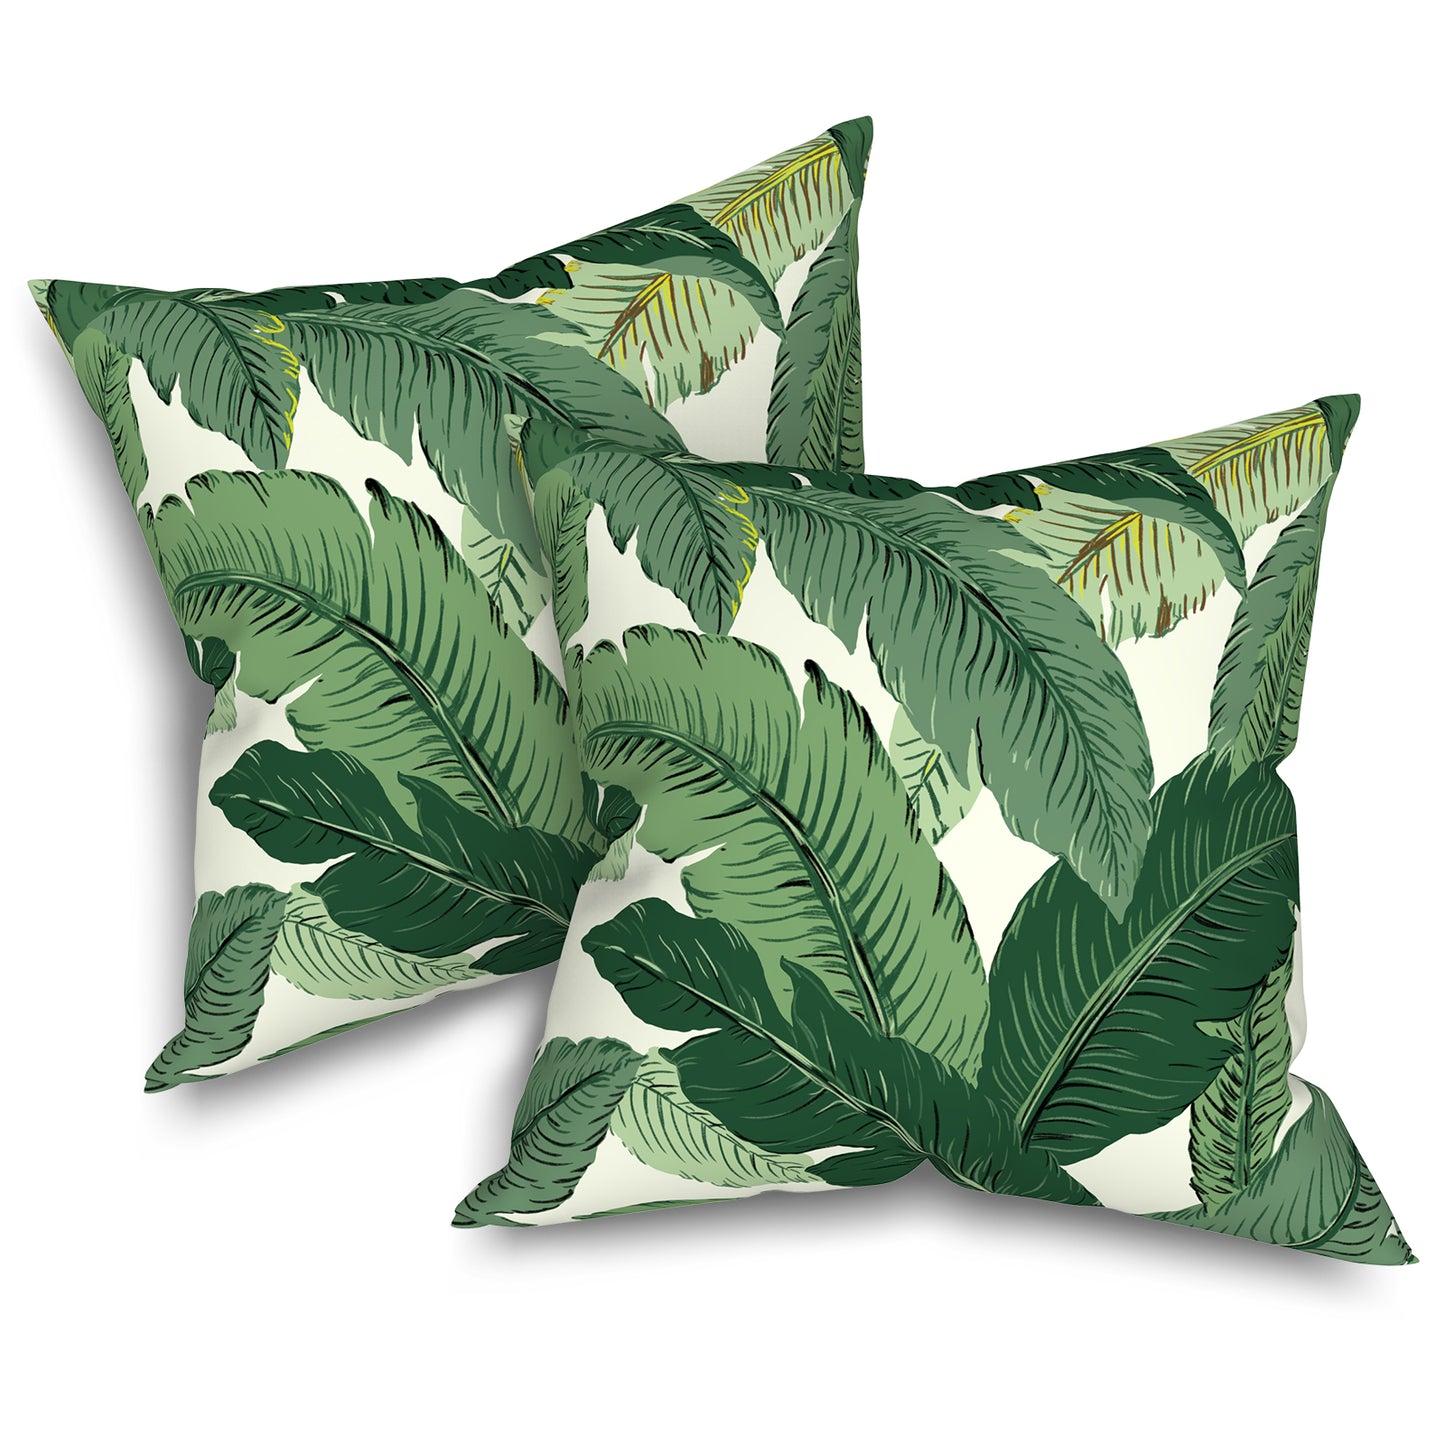 Melody Elephant Outdoor/Indoor Throw Pillow Covers Set of 2, All Weather Square Pillow Cases 16x16 Inch, Patio Cushion Pillow of Home Furniture Use, Swaying Palms Green